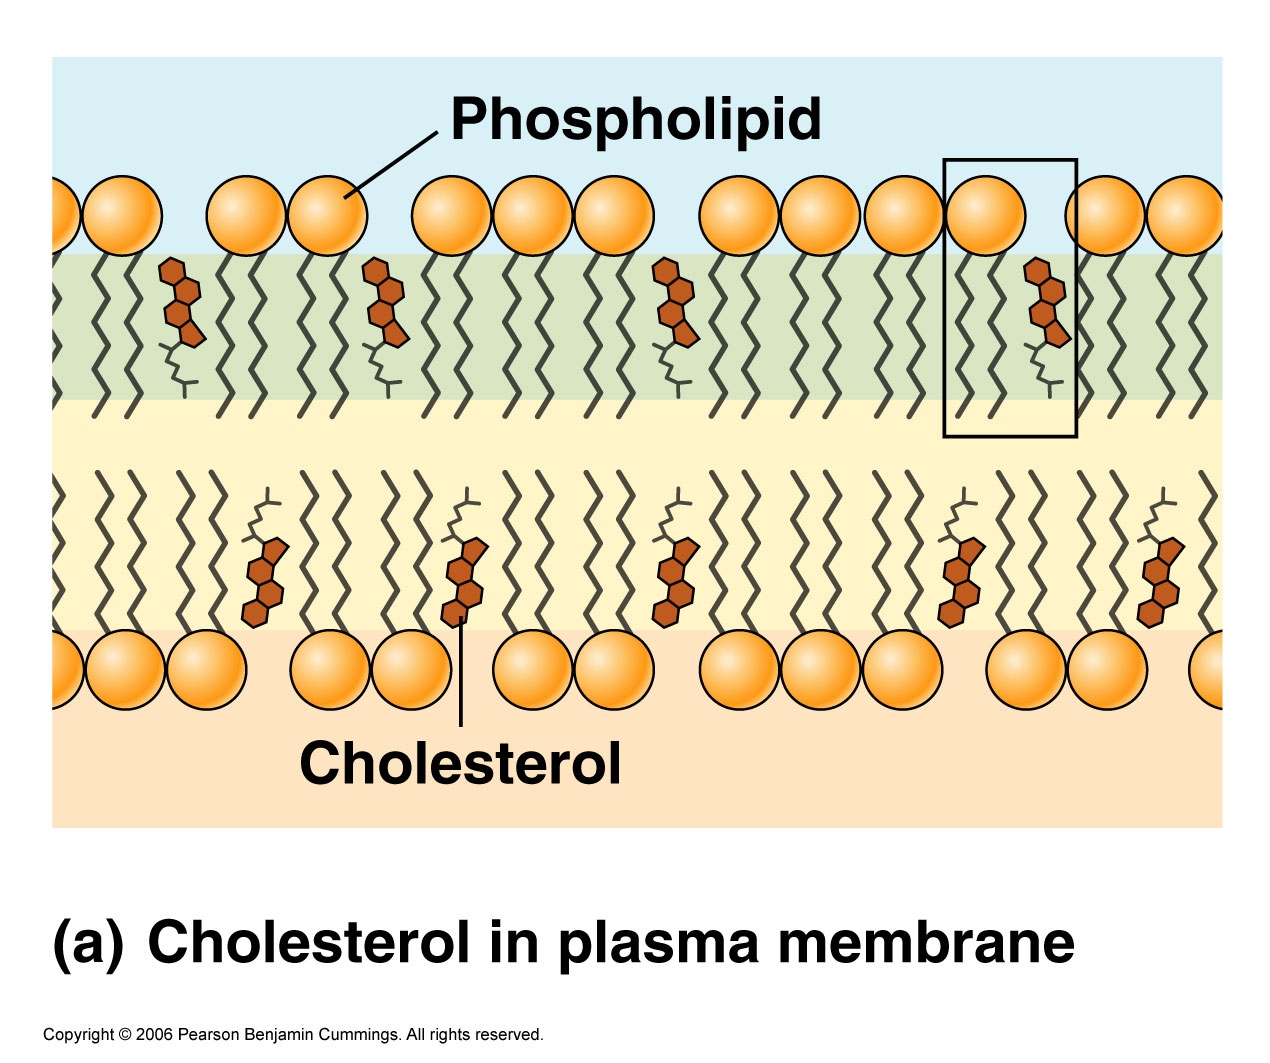 Cholesterol is an essential component of human cell membranes (source)